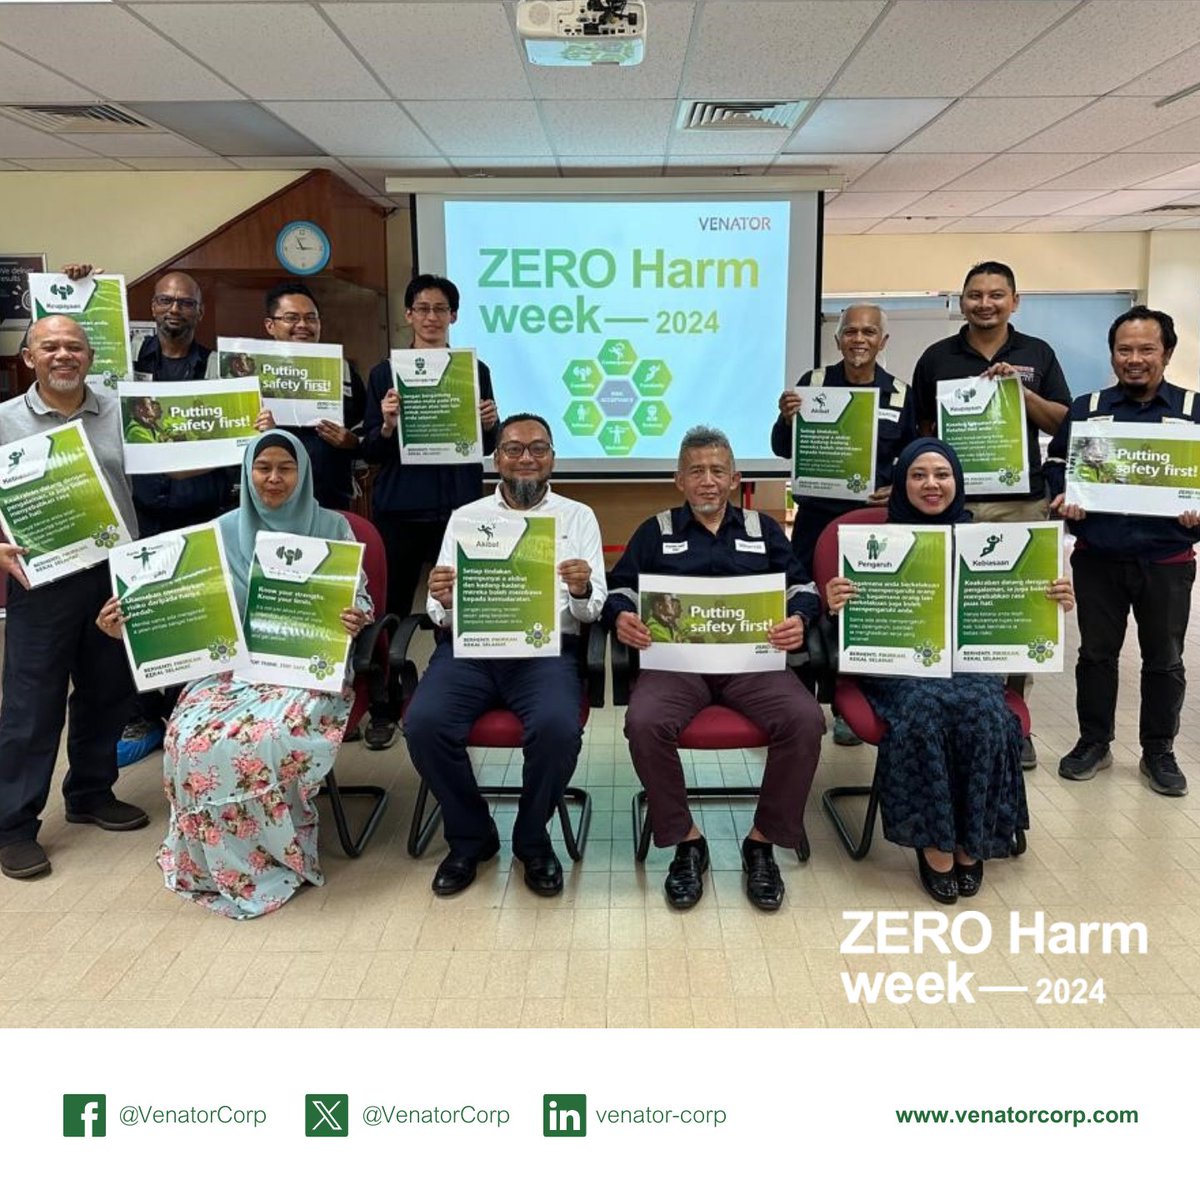 Happy World Day for Safety and Health at Work! This past week, our dedicated team has been focused on enhancing safety protocols, sharing best practices and fostering a culture of care for one another as part of our ZERO Harm week.

#ZEROHarmWeek #WorldSafetyandHealthatWorkDay